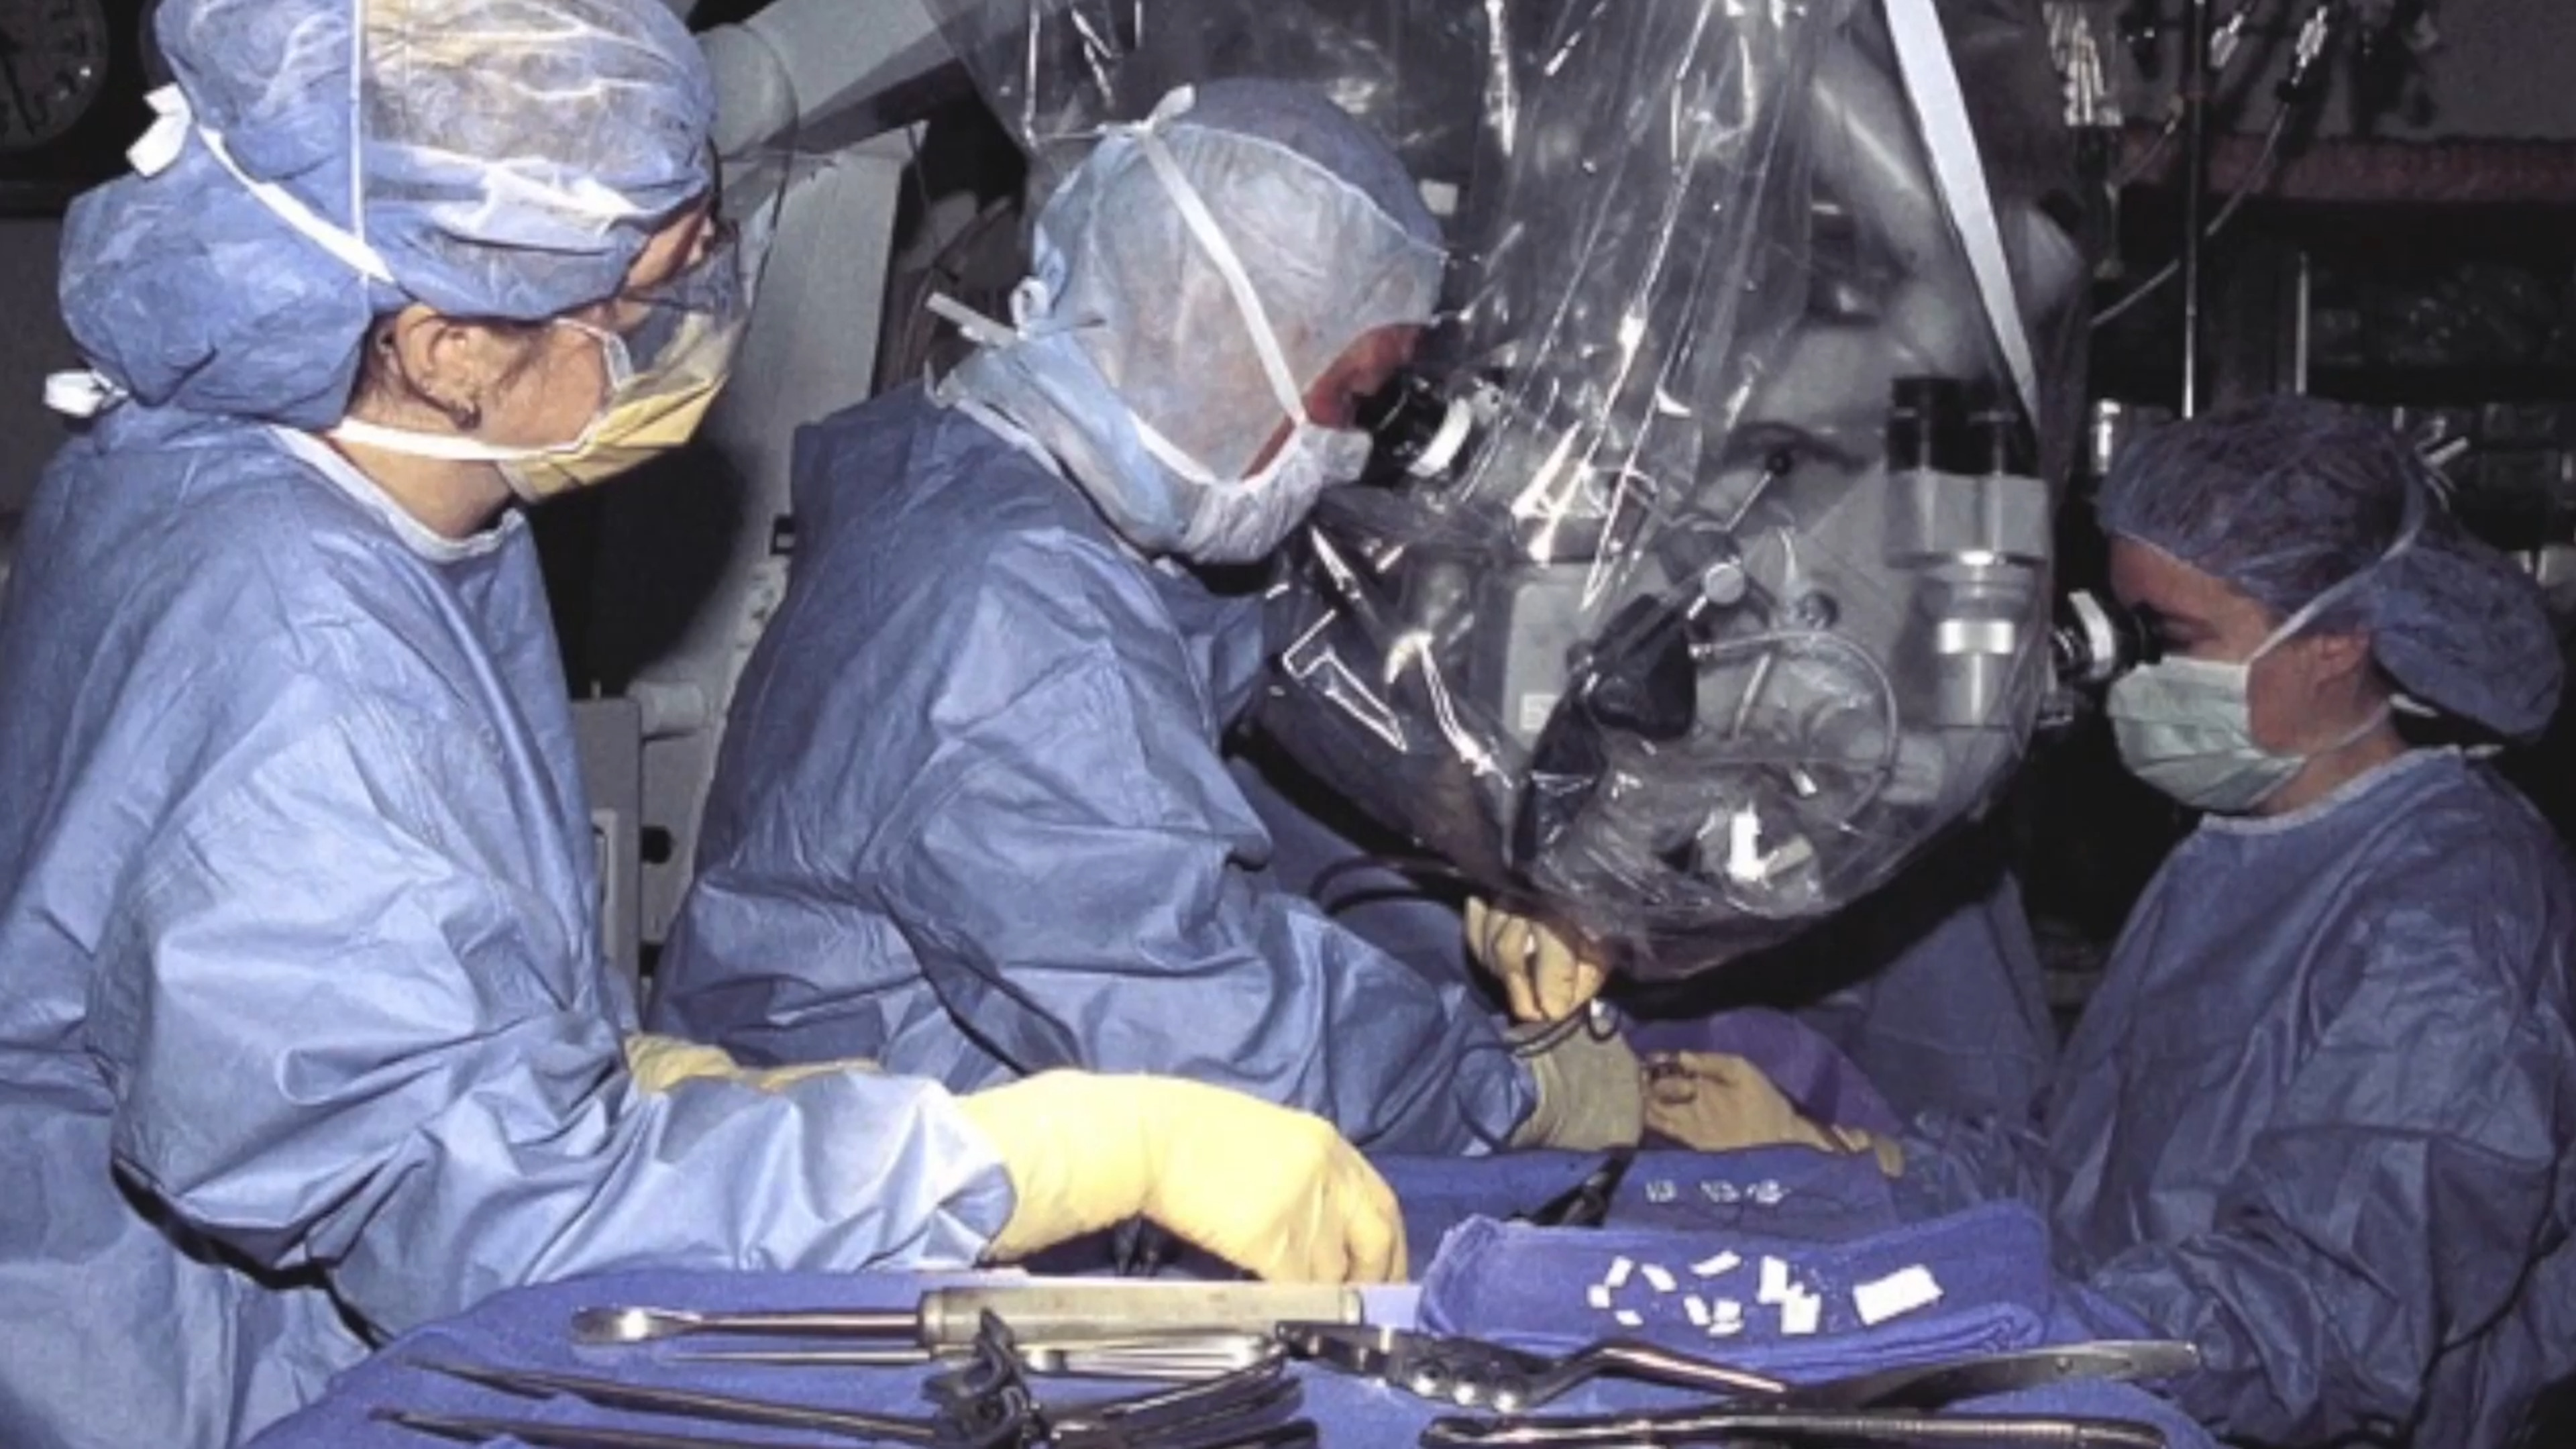 Dr. Sonntag Reflects on His Life and Career in Spinal Neurosurgery